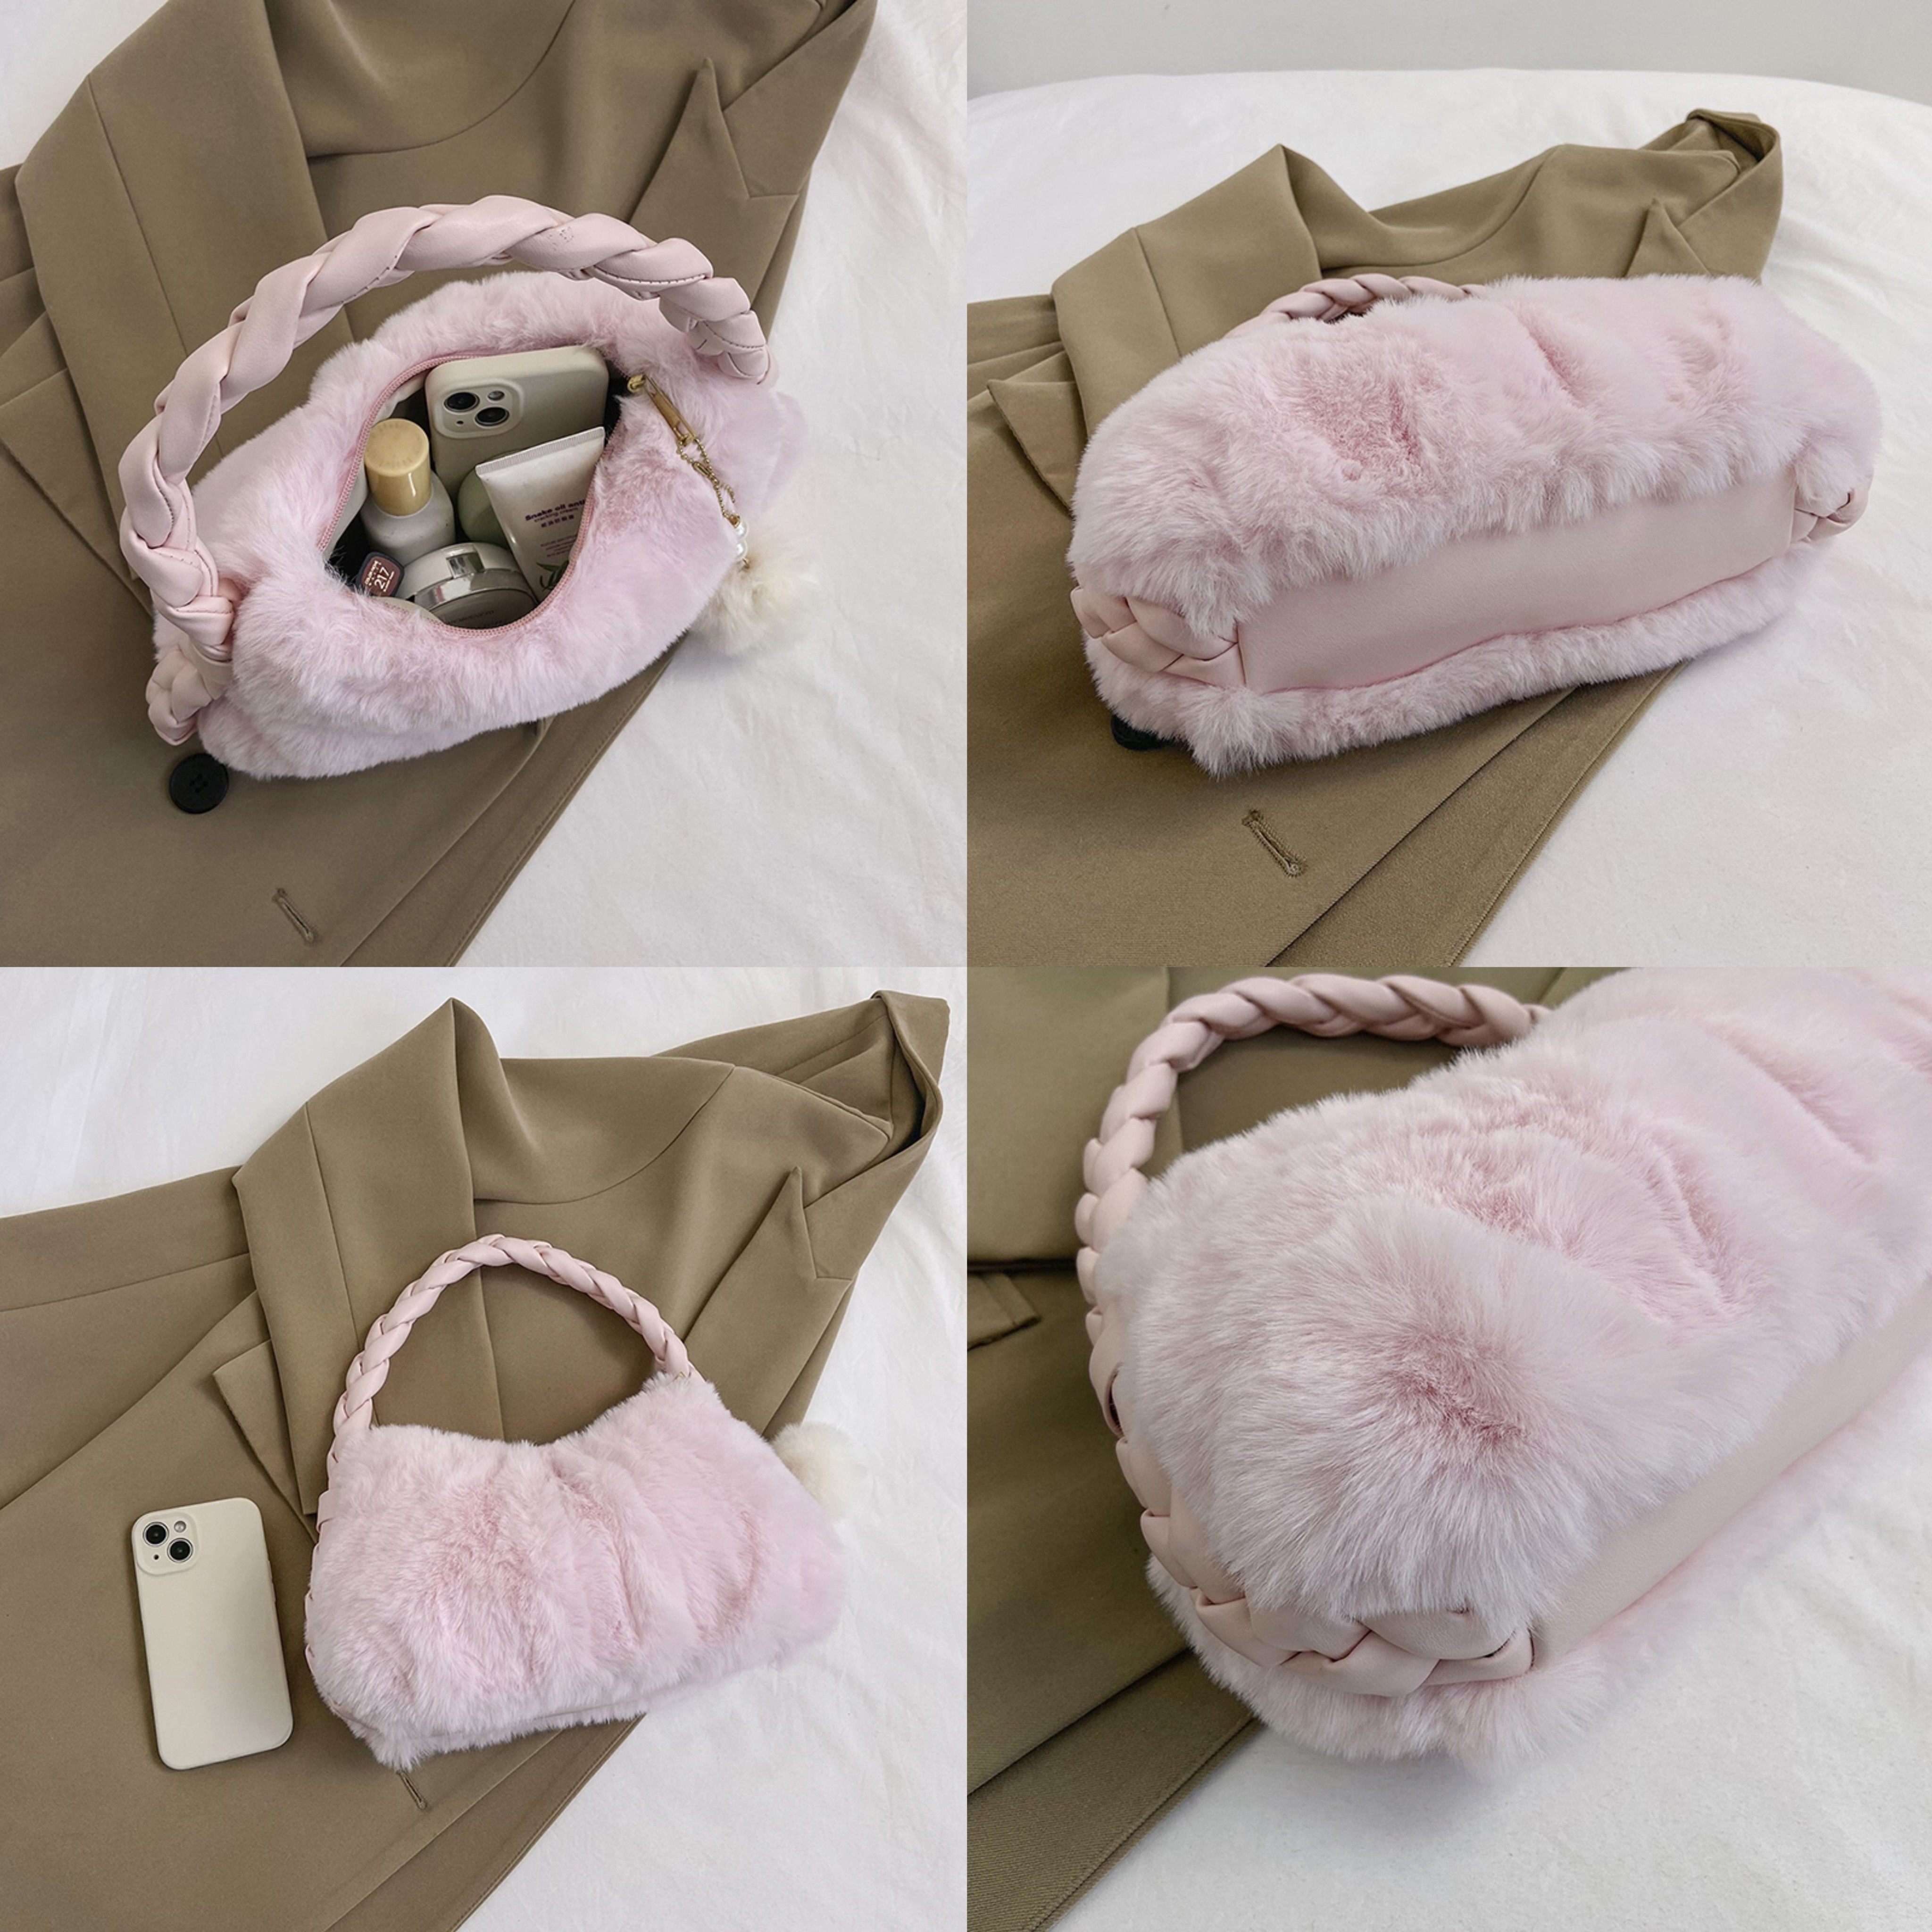 Fuzzy, Soft, Plush Twist Top Handle Fluffy Chain Satchel Bag With